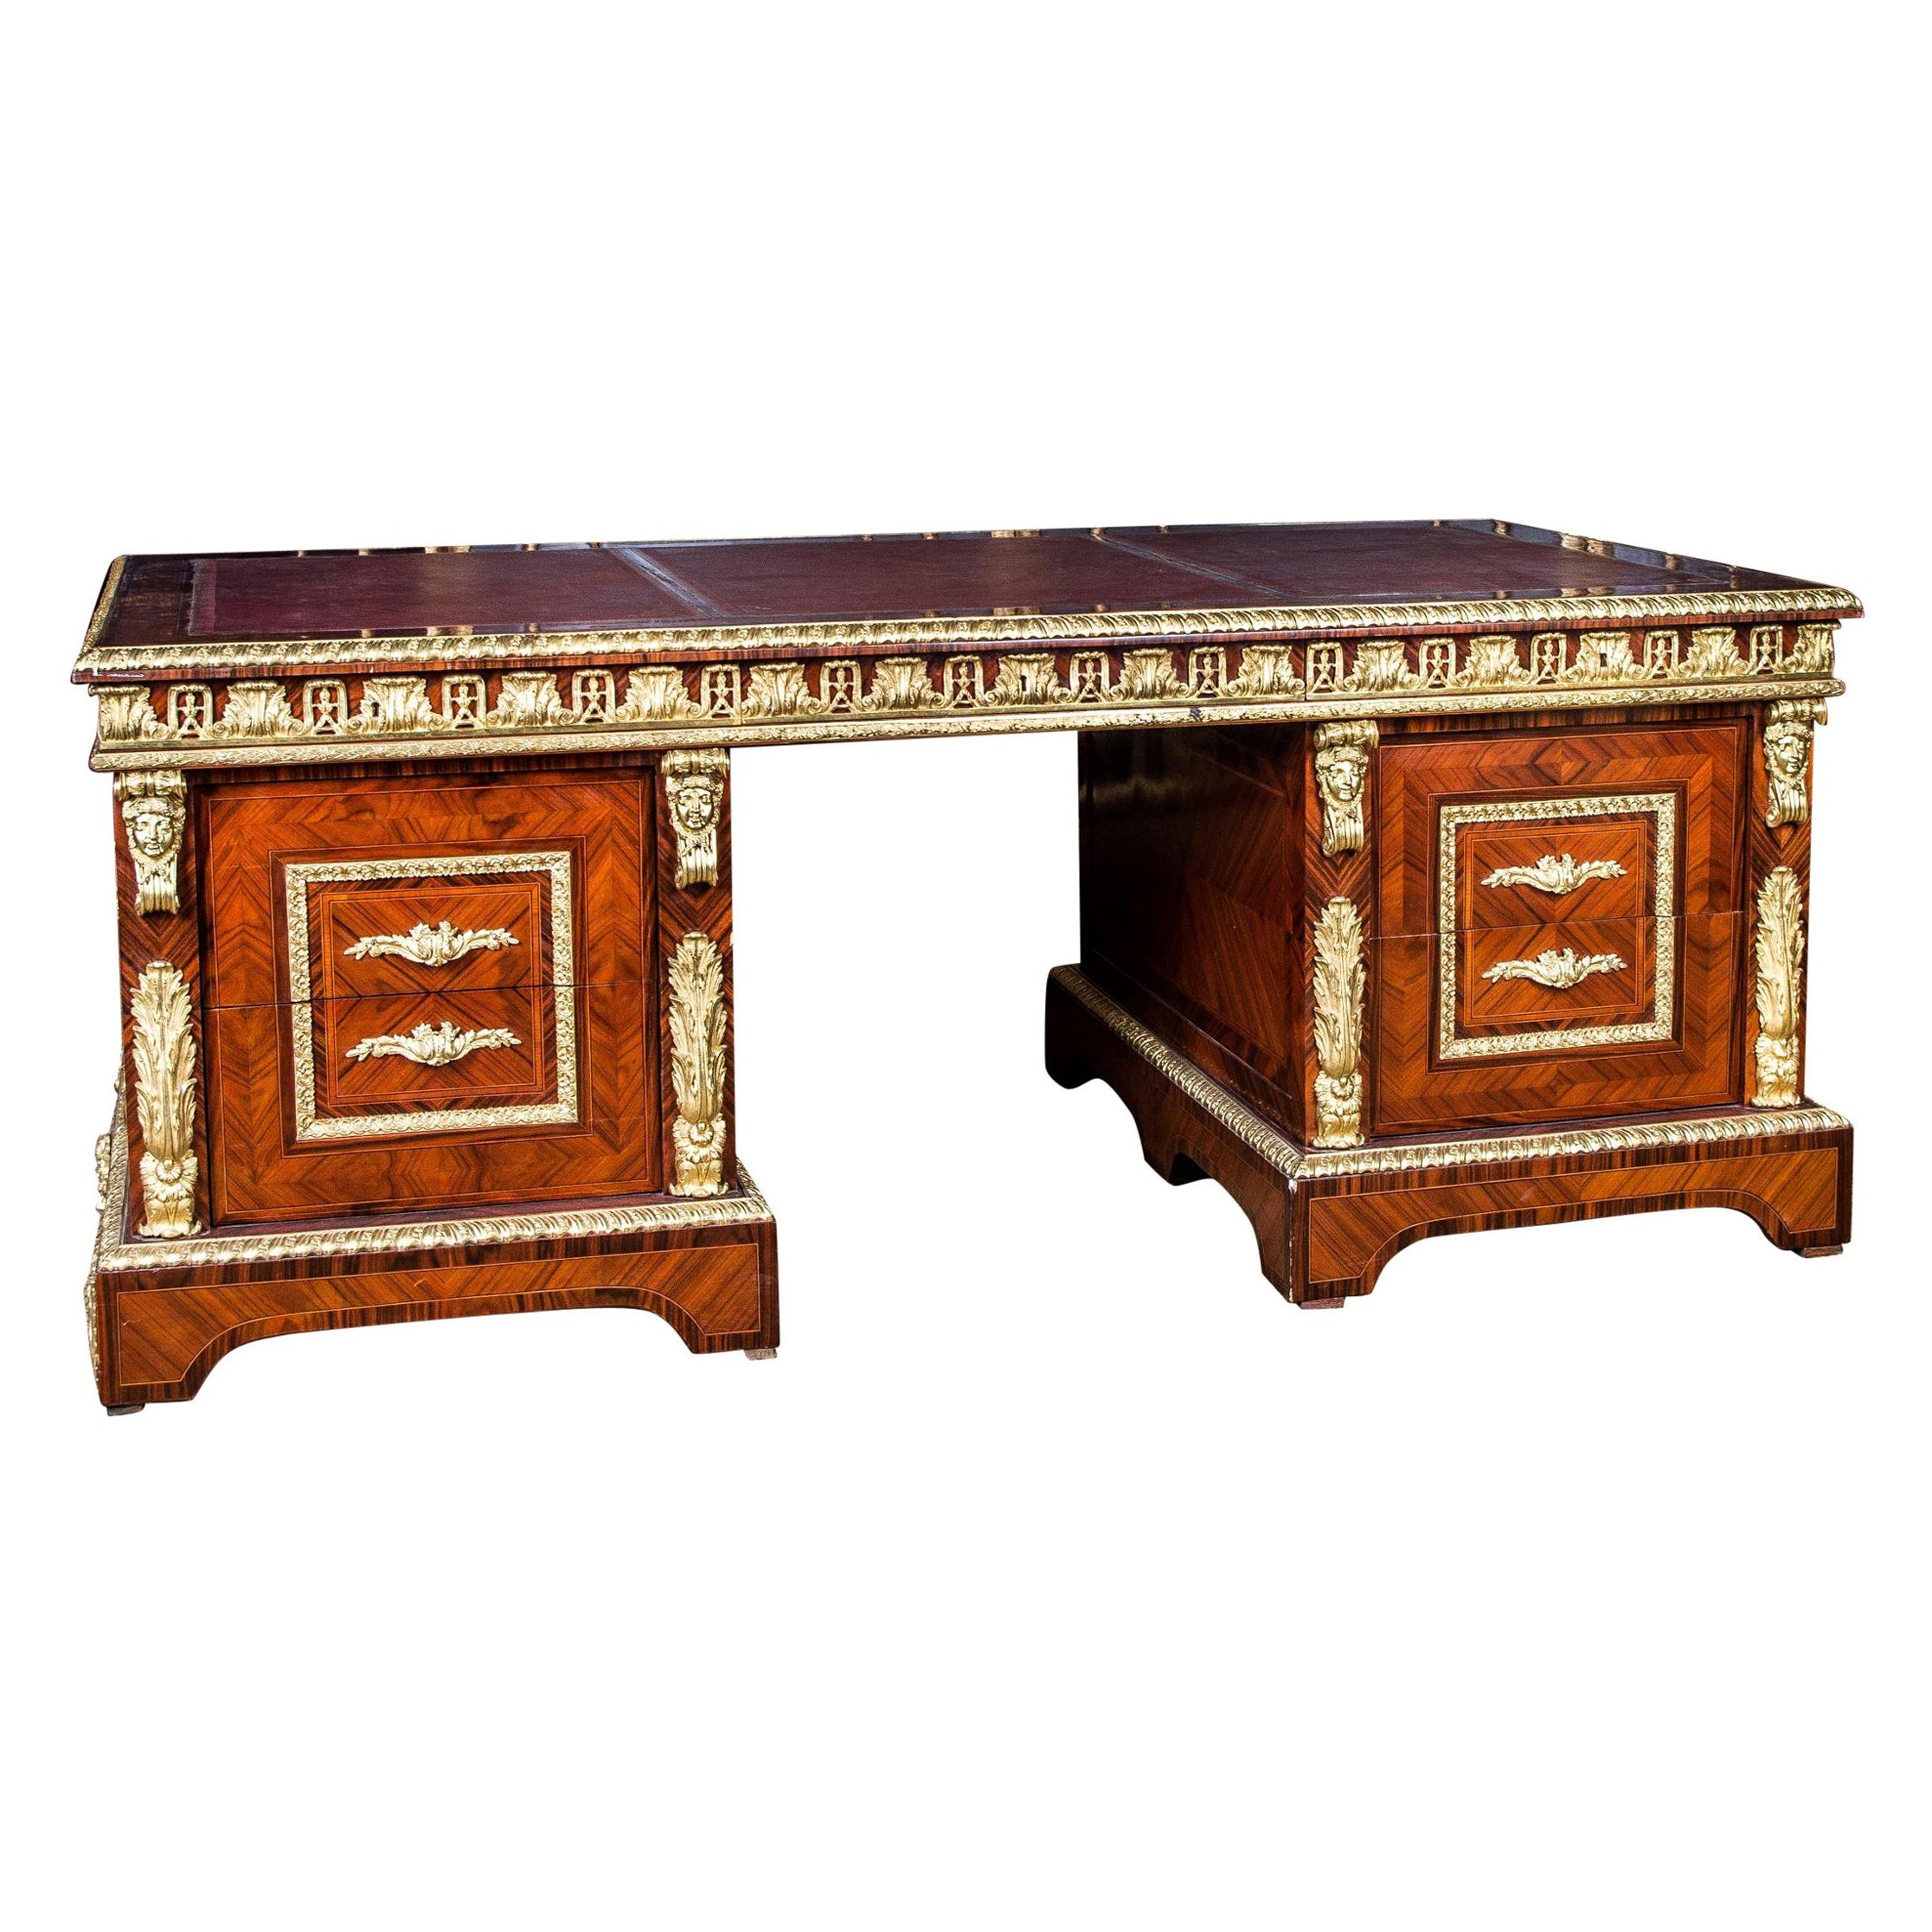 Impressive French Writing Desk in the Antique Style of Louis XIV Mahogany Bronze